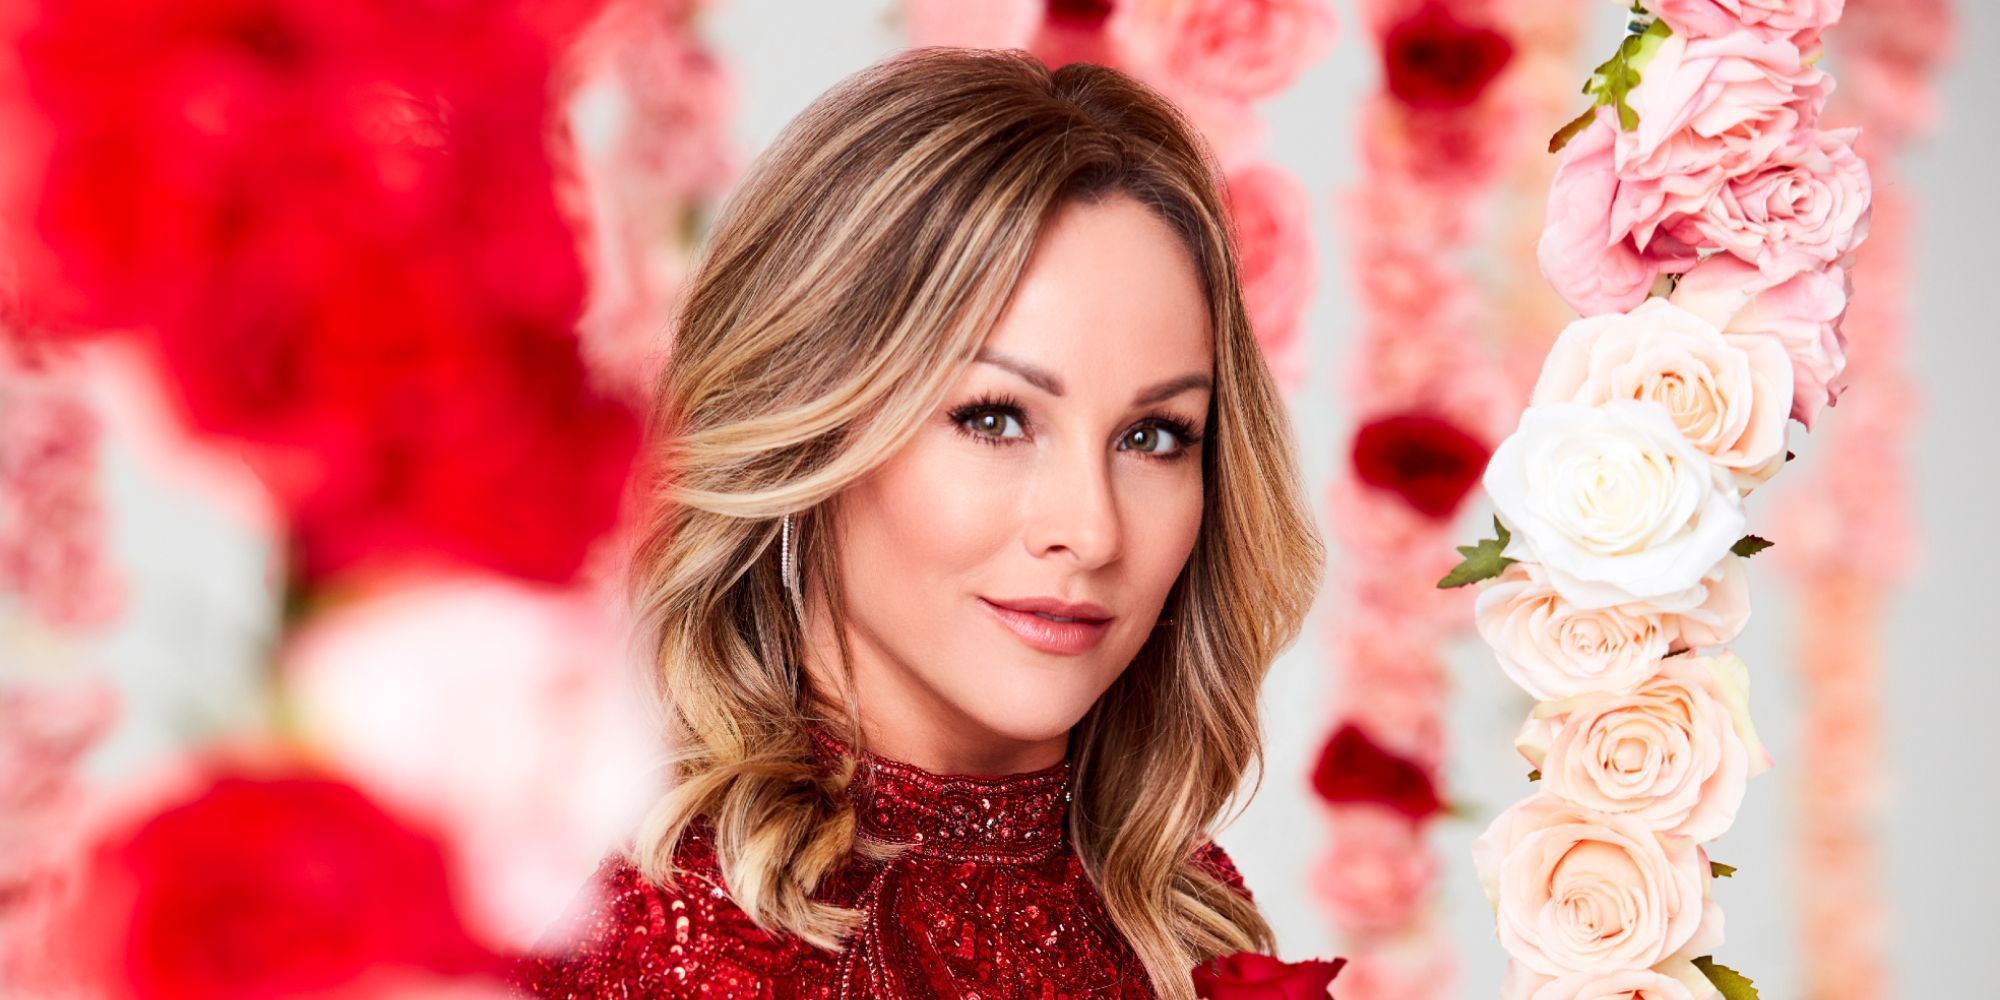 The Bachelorette: What Is Clare Crawley's Net Worth?